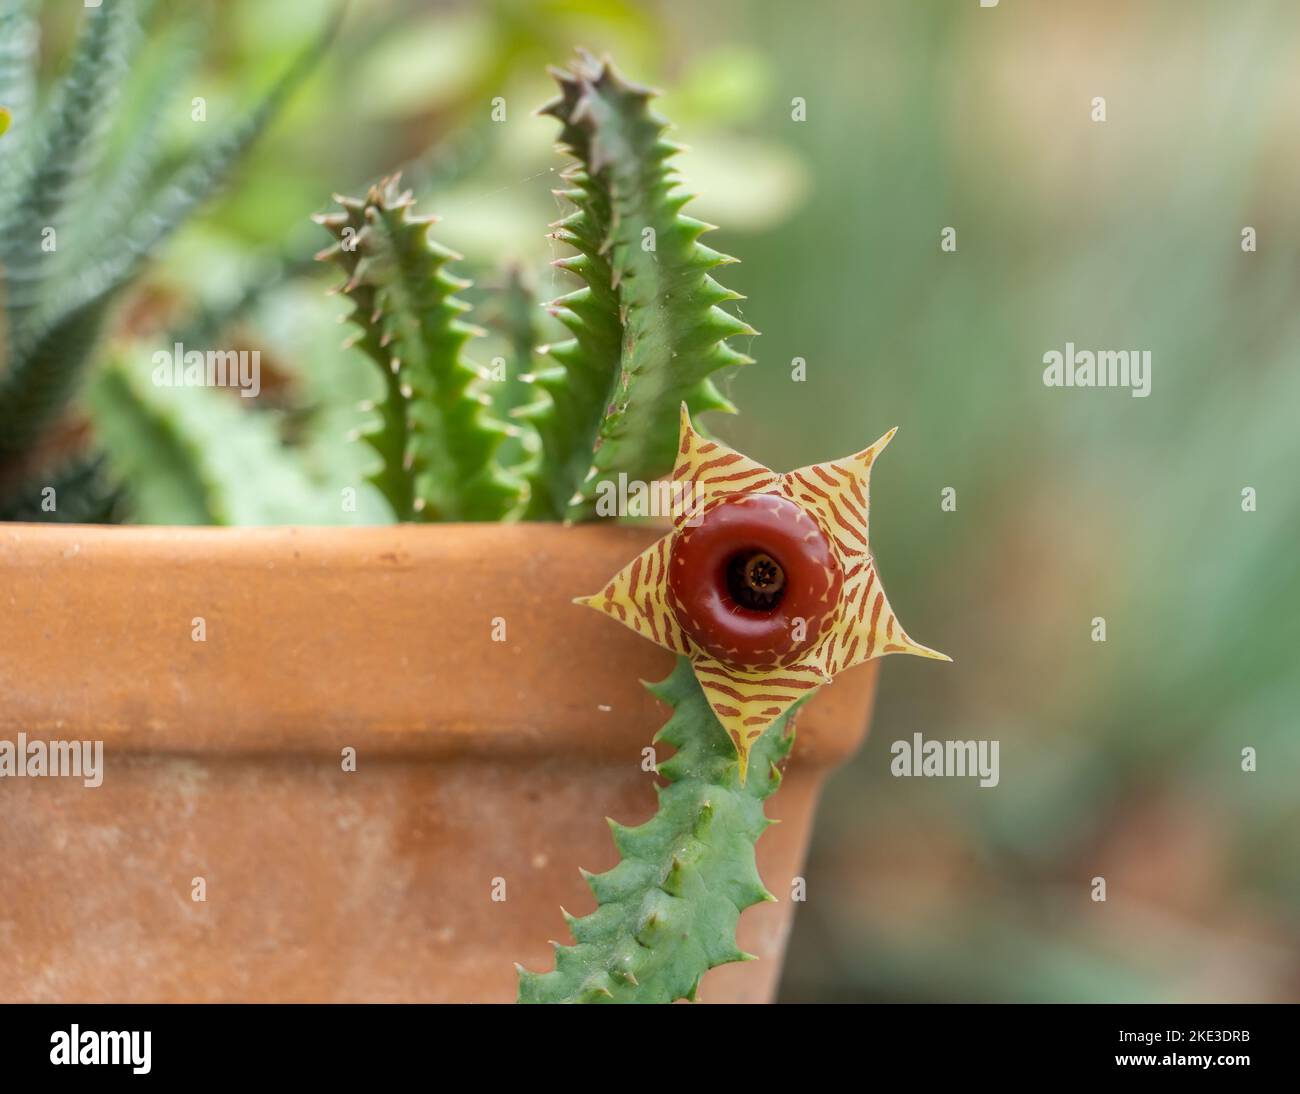 Huernia zebrina, lifesaver plant, lifesaver cactus, or carrion flower, is a small perennial succulent with beautiful flowers that have a terrible smell. Stock Photo